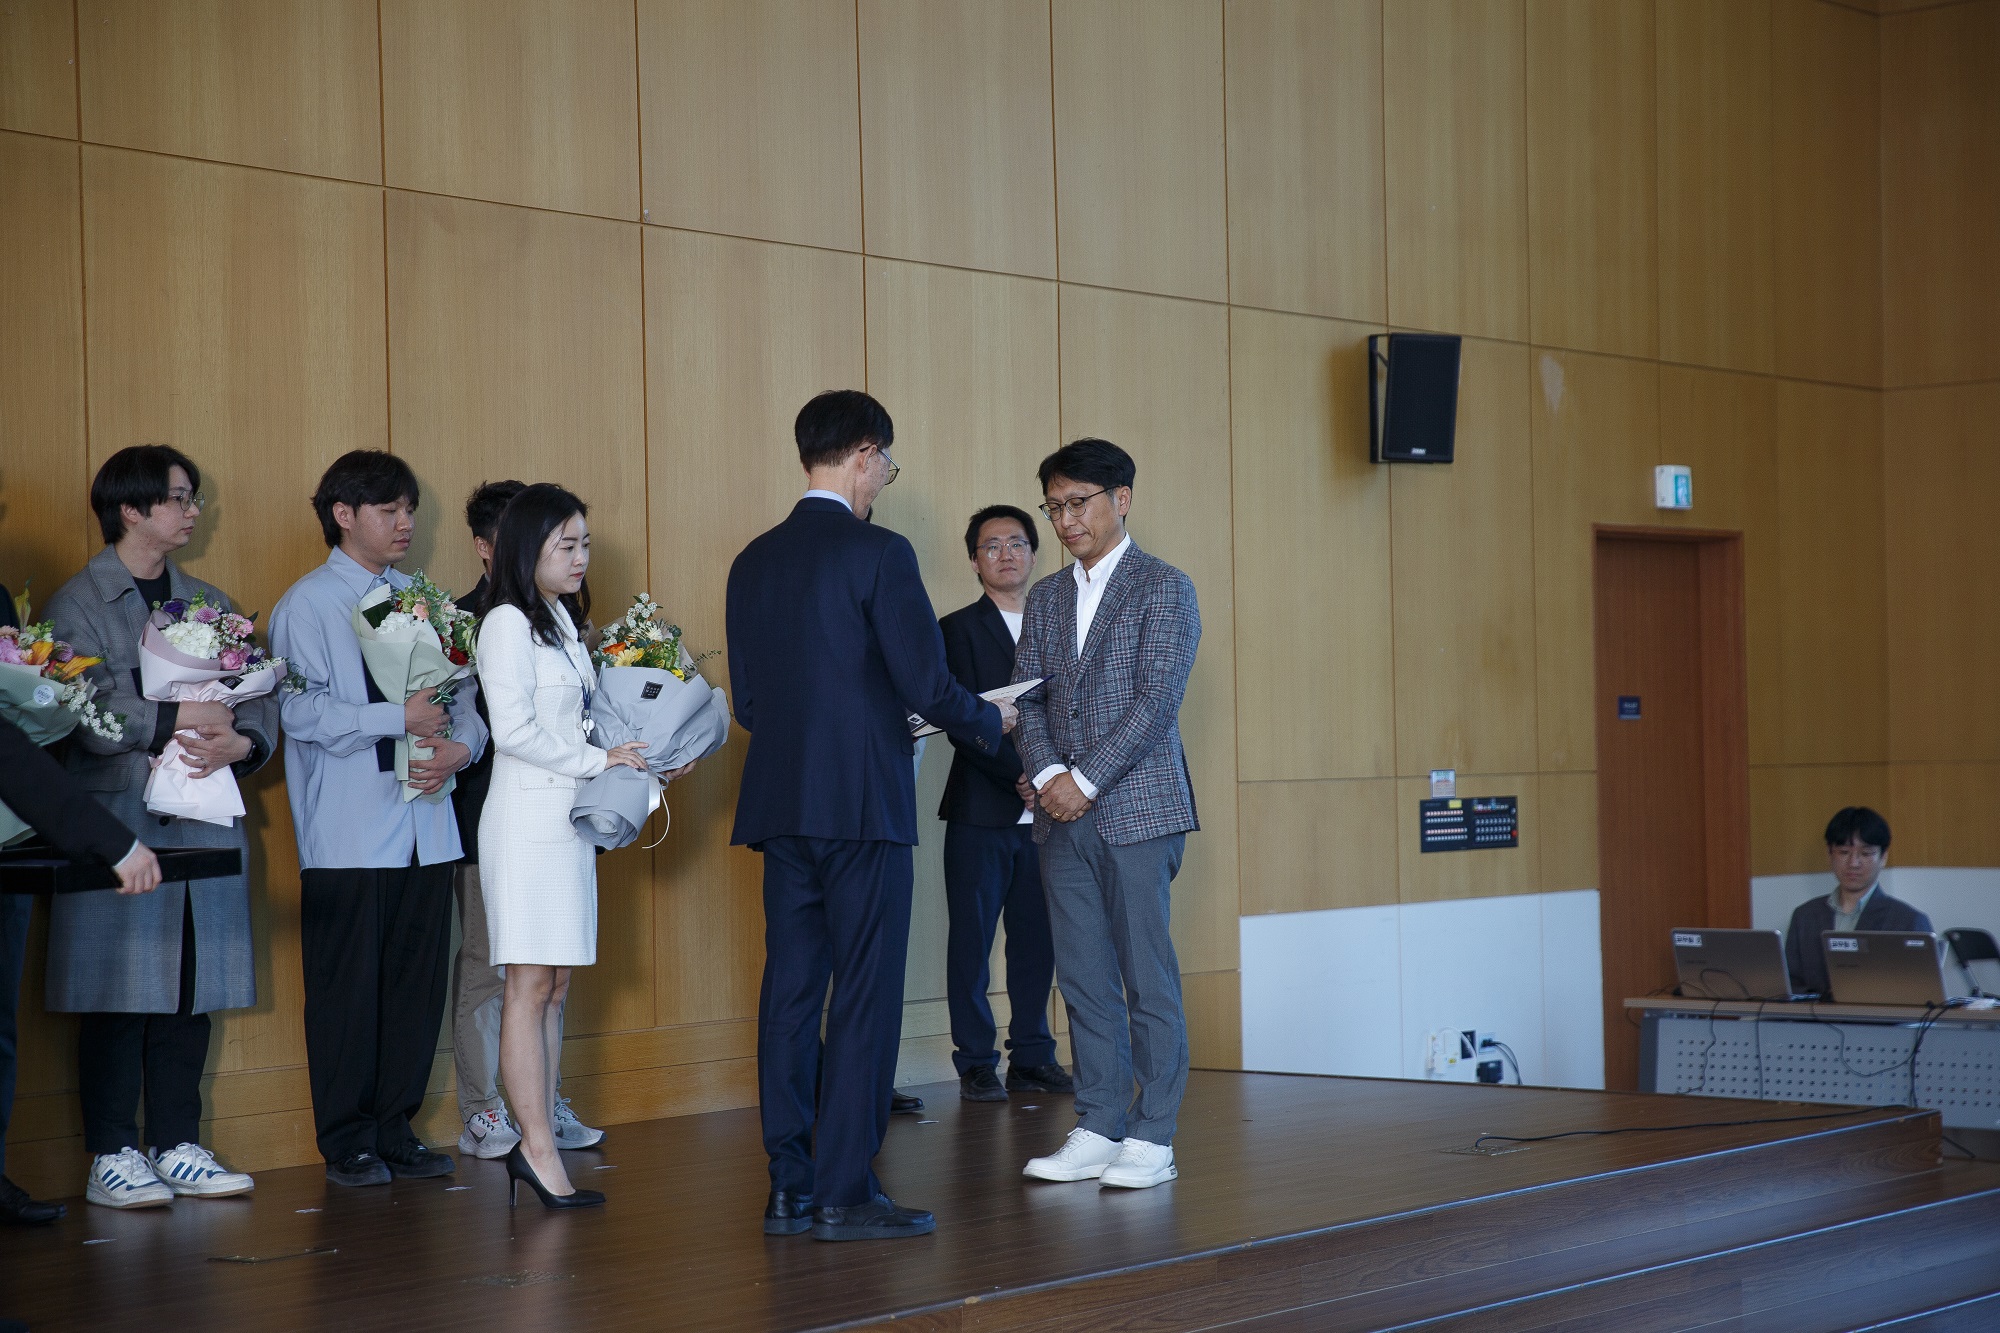 Professor Hankwon Lim (UNIST Graduate School of Carbon Neutrality) has been presented with the Grand Prize in the Industry-Academic Cooperation sector.